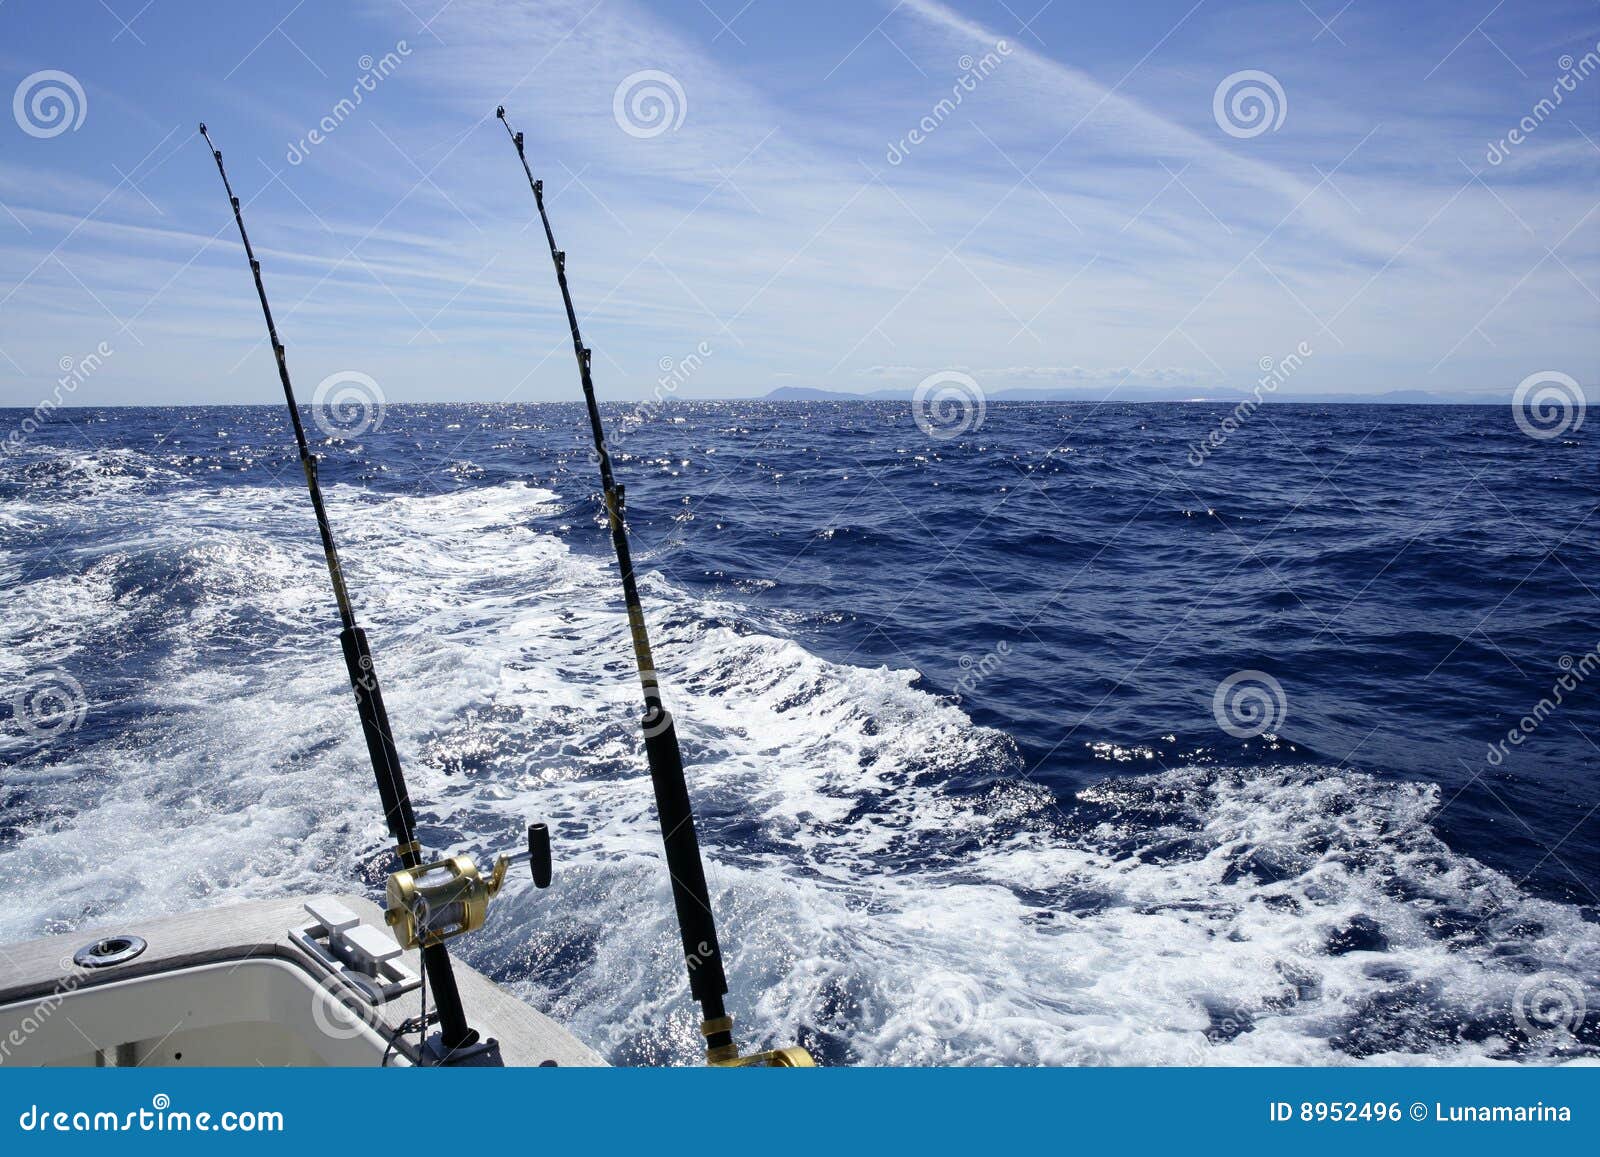 Fishing Rod And Reel On Boat Stock Photo - Download Image Now